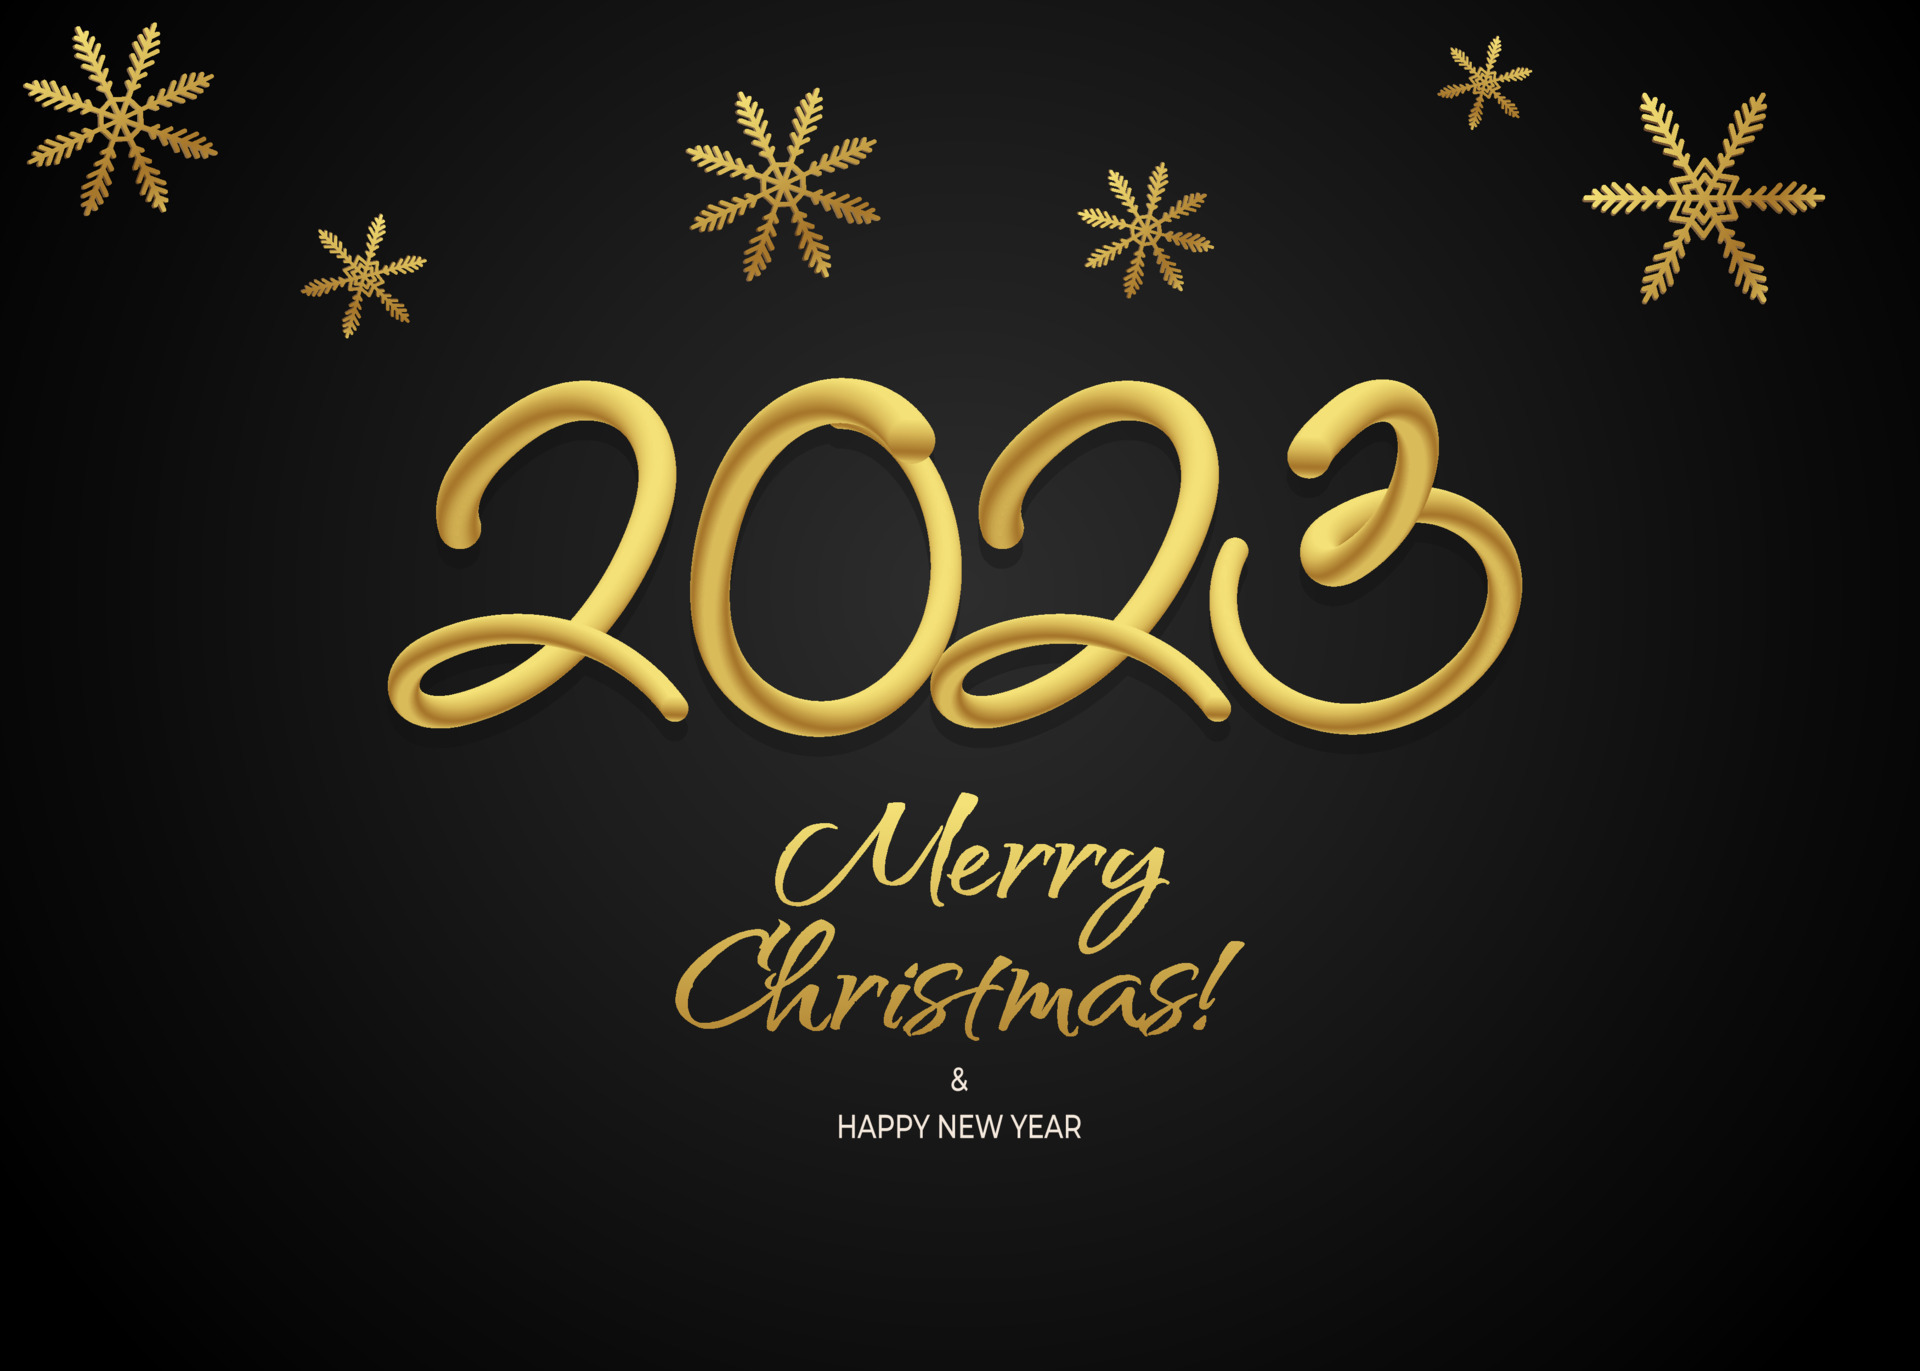 Happy new year 3D 2023 greeting wallpaper vector. Merry Christmas design greeting text with christmas decor elements such as a snowflakes on a black background with luxury gold. Vector Art